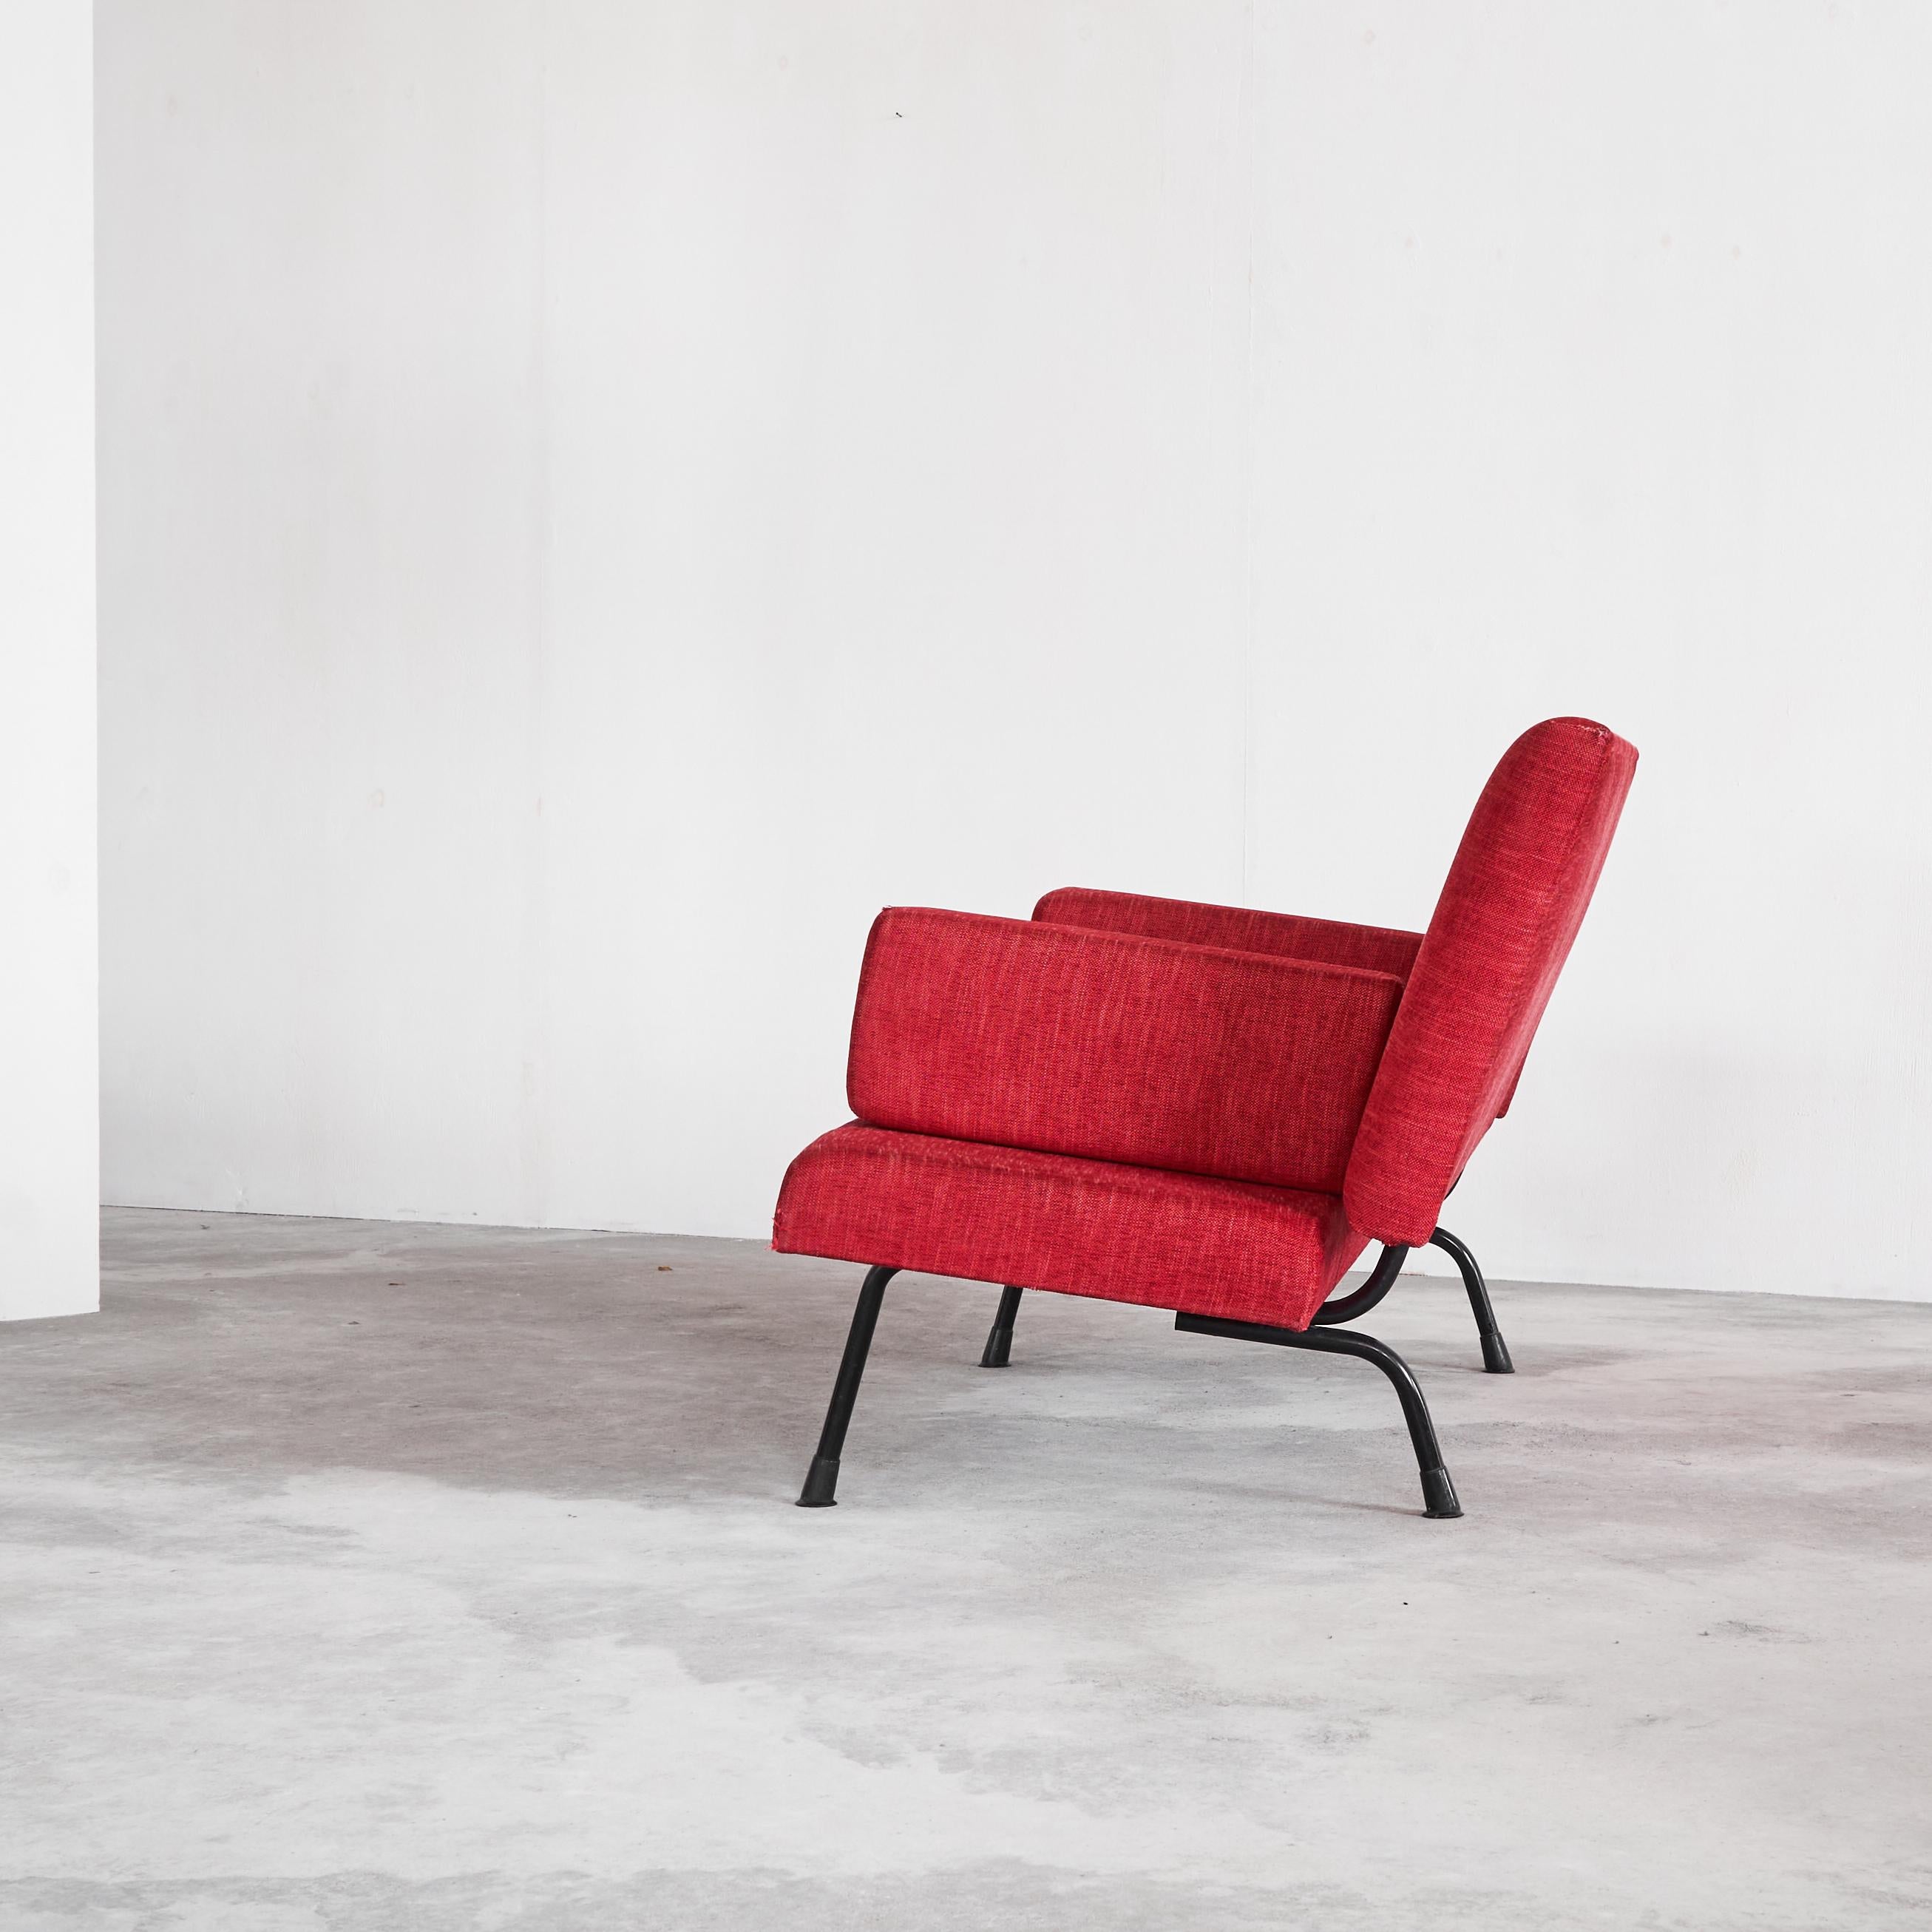 20th Century Wim Rietveld '447' Sofa in Red Fabric 1950s For Sale